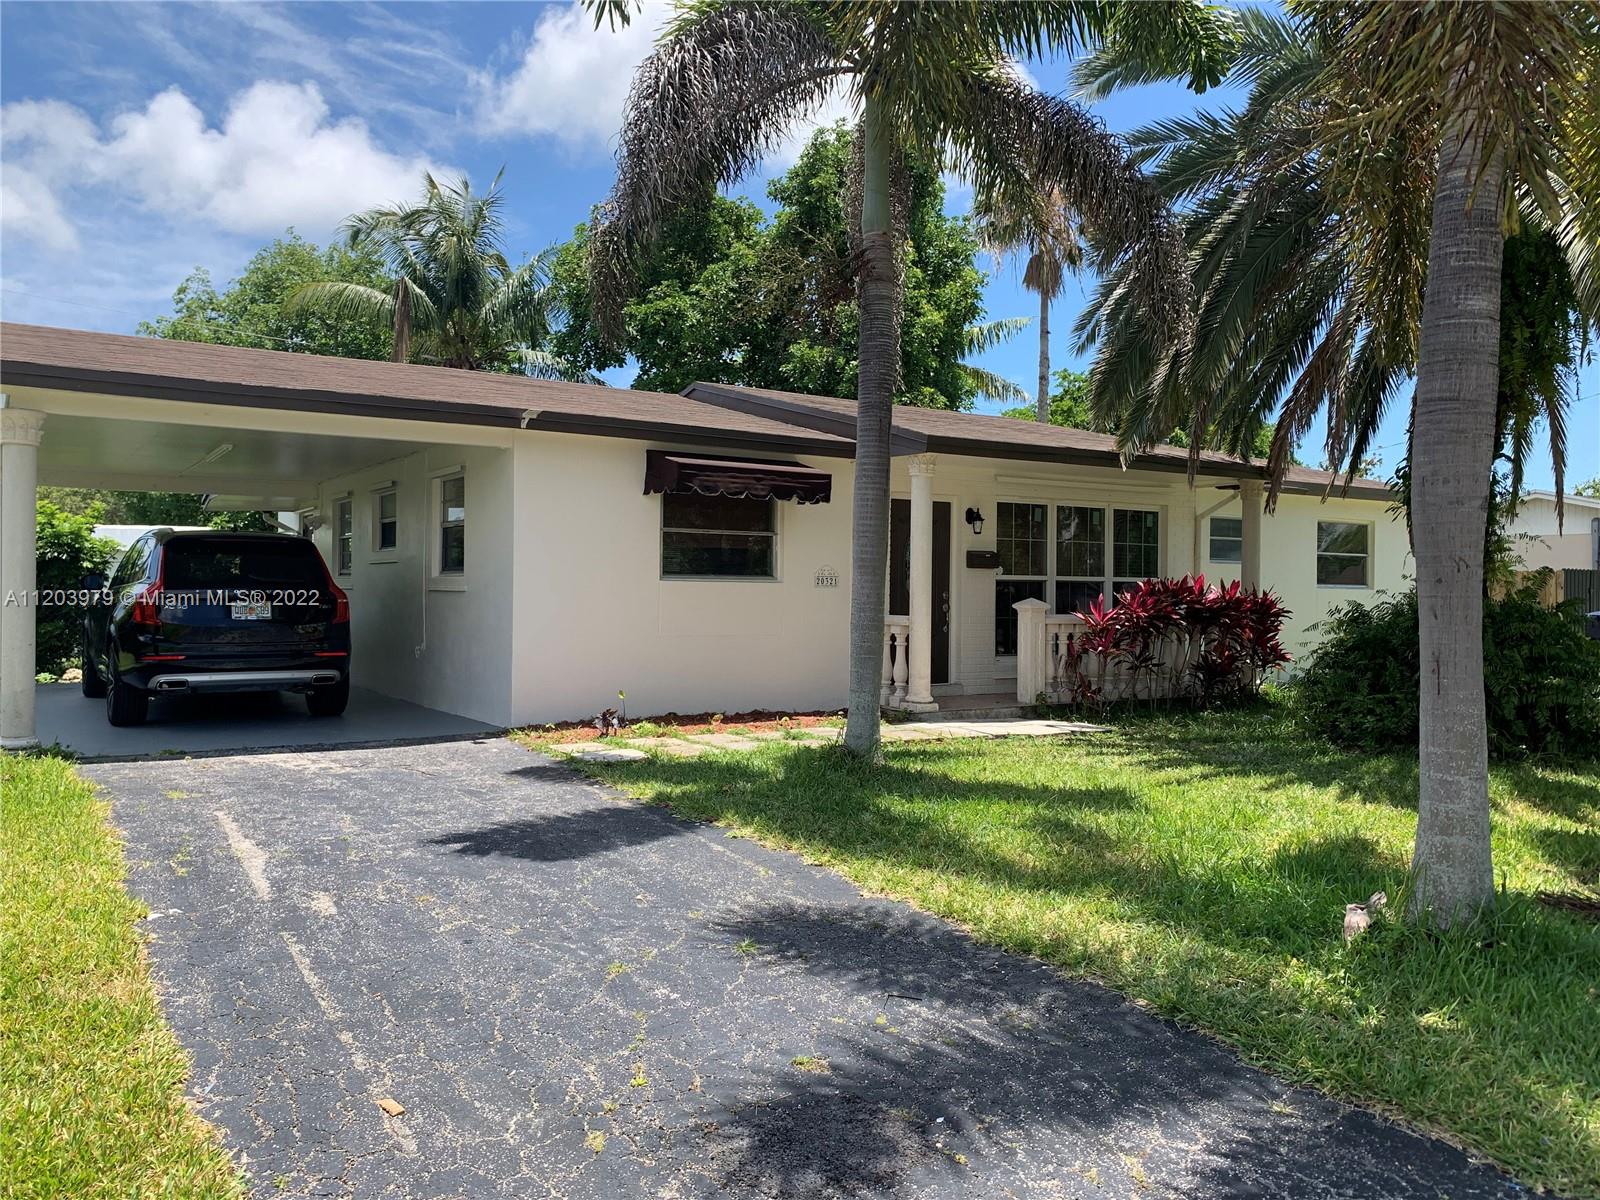 Excellent opportunity to rent this great home with all remodeled kitchen, 3 bedrooms and 2 full baths, fresh painted
inside and outside, all tile floors, big family room, no association, room for a boat, one carport, excellent location
in Cutler Bay, near shopping malls. schools, USI, Turnpike and more. Bring your best offer and your most qualified
tenant.